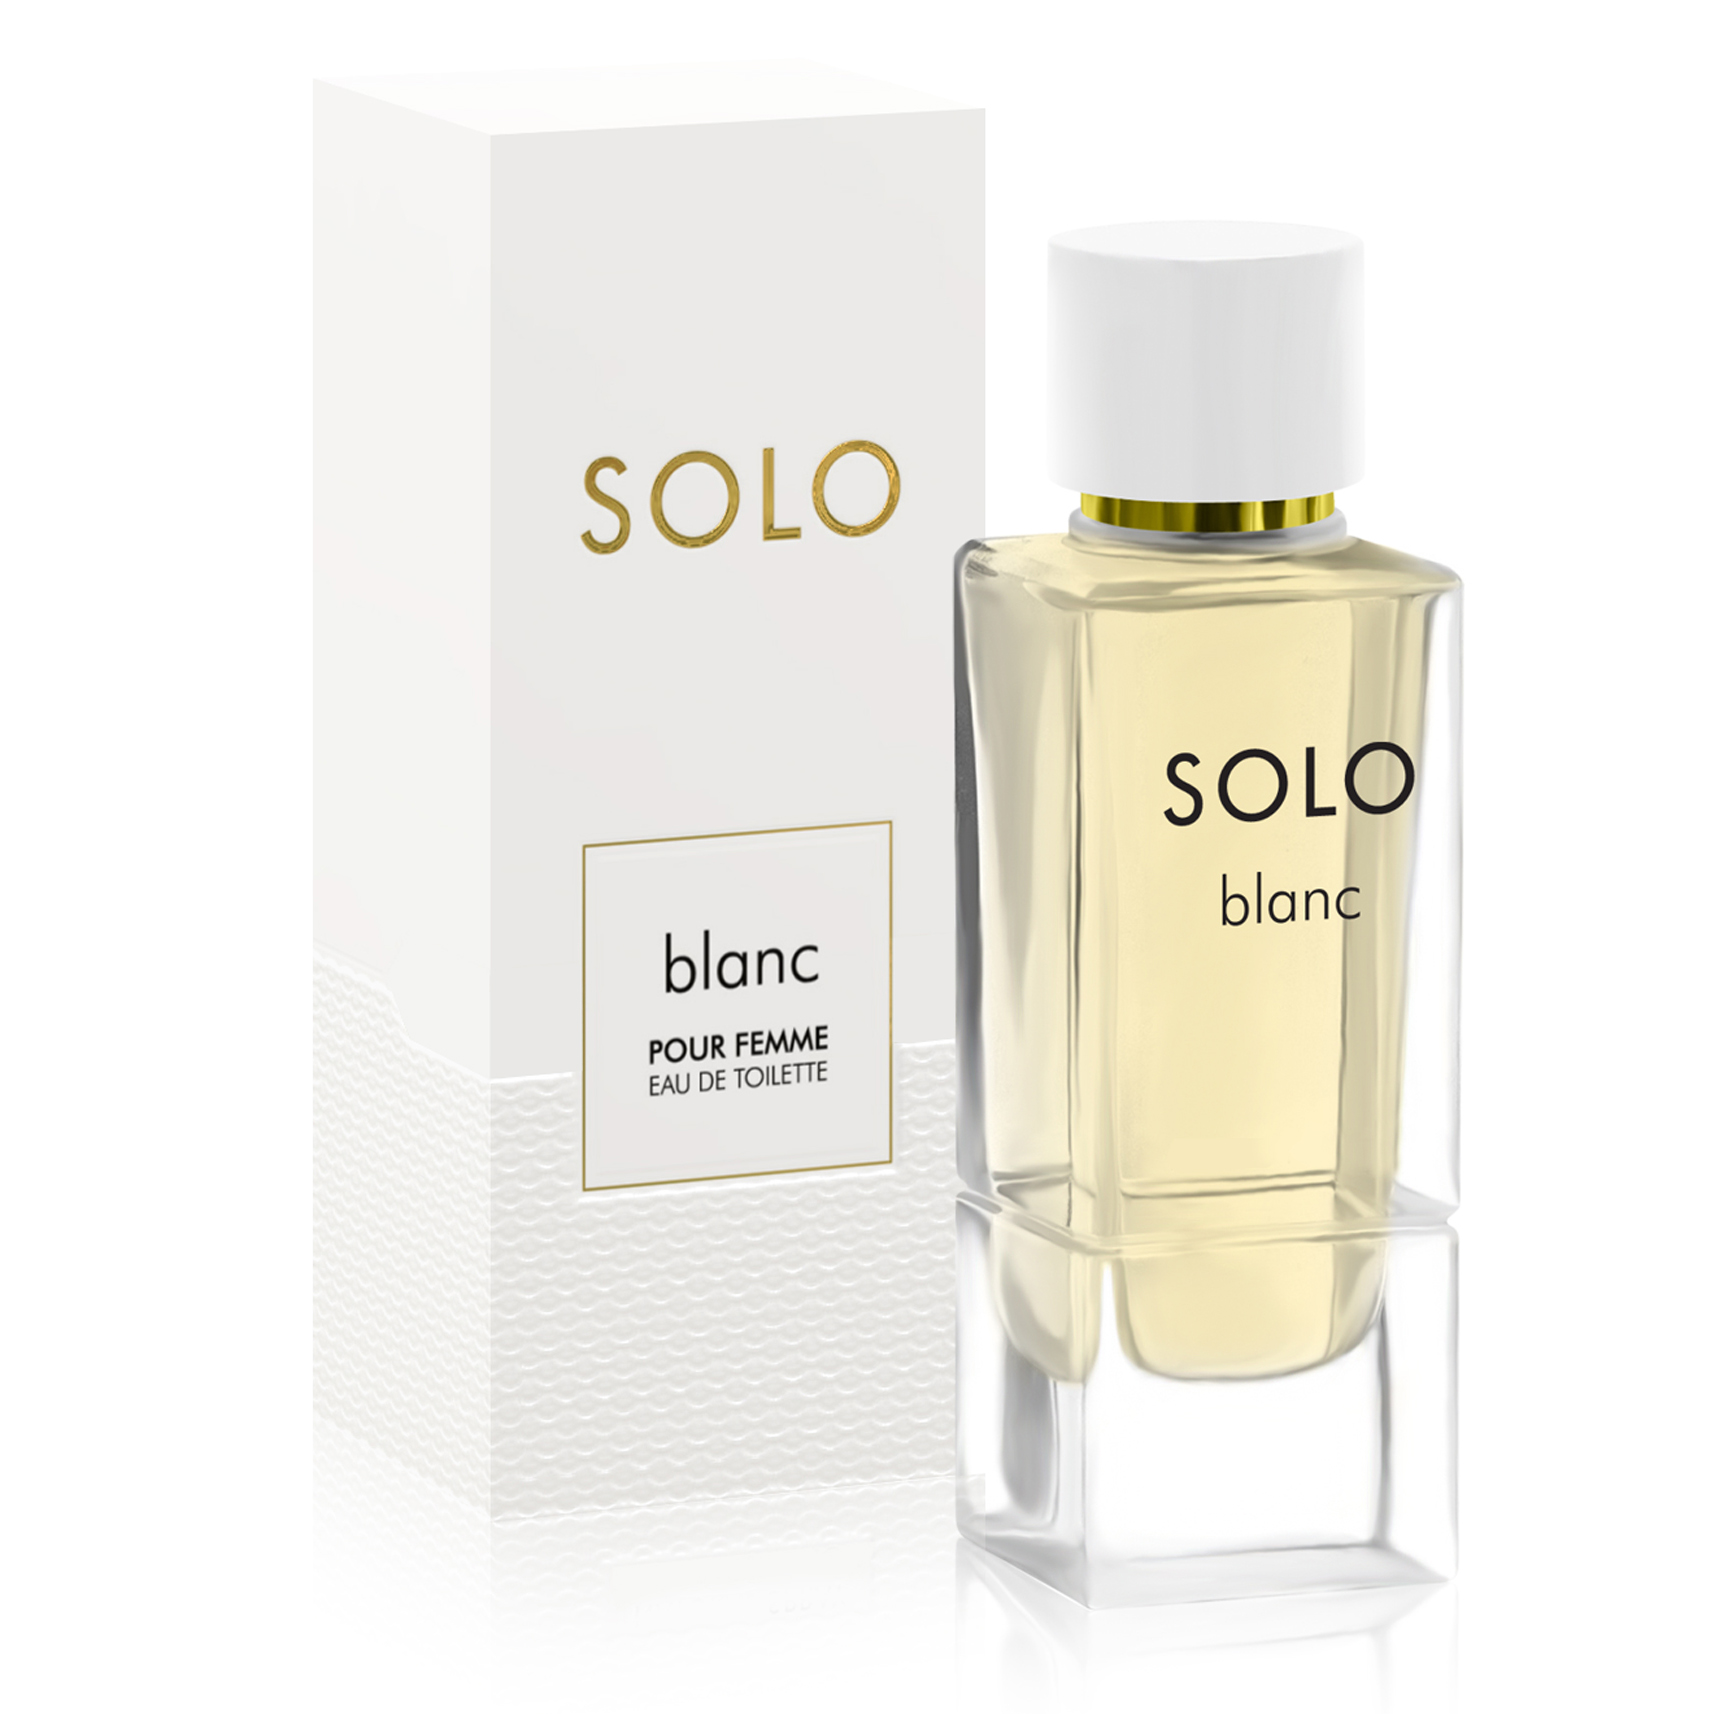 Naming, bottle design and shipping box for the Solo fragrance. By Color.zone creative agency.